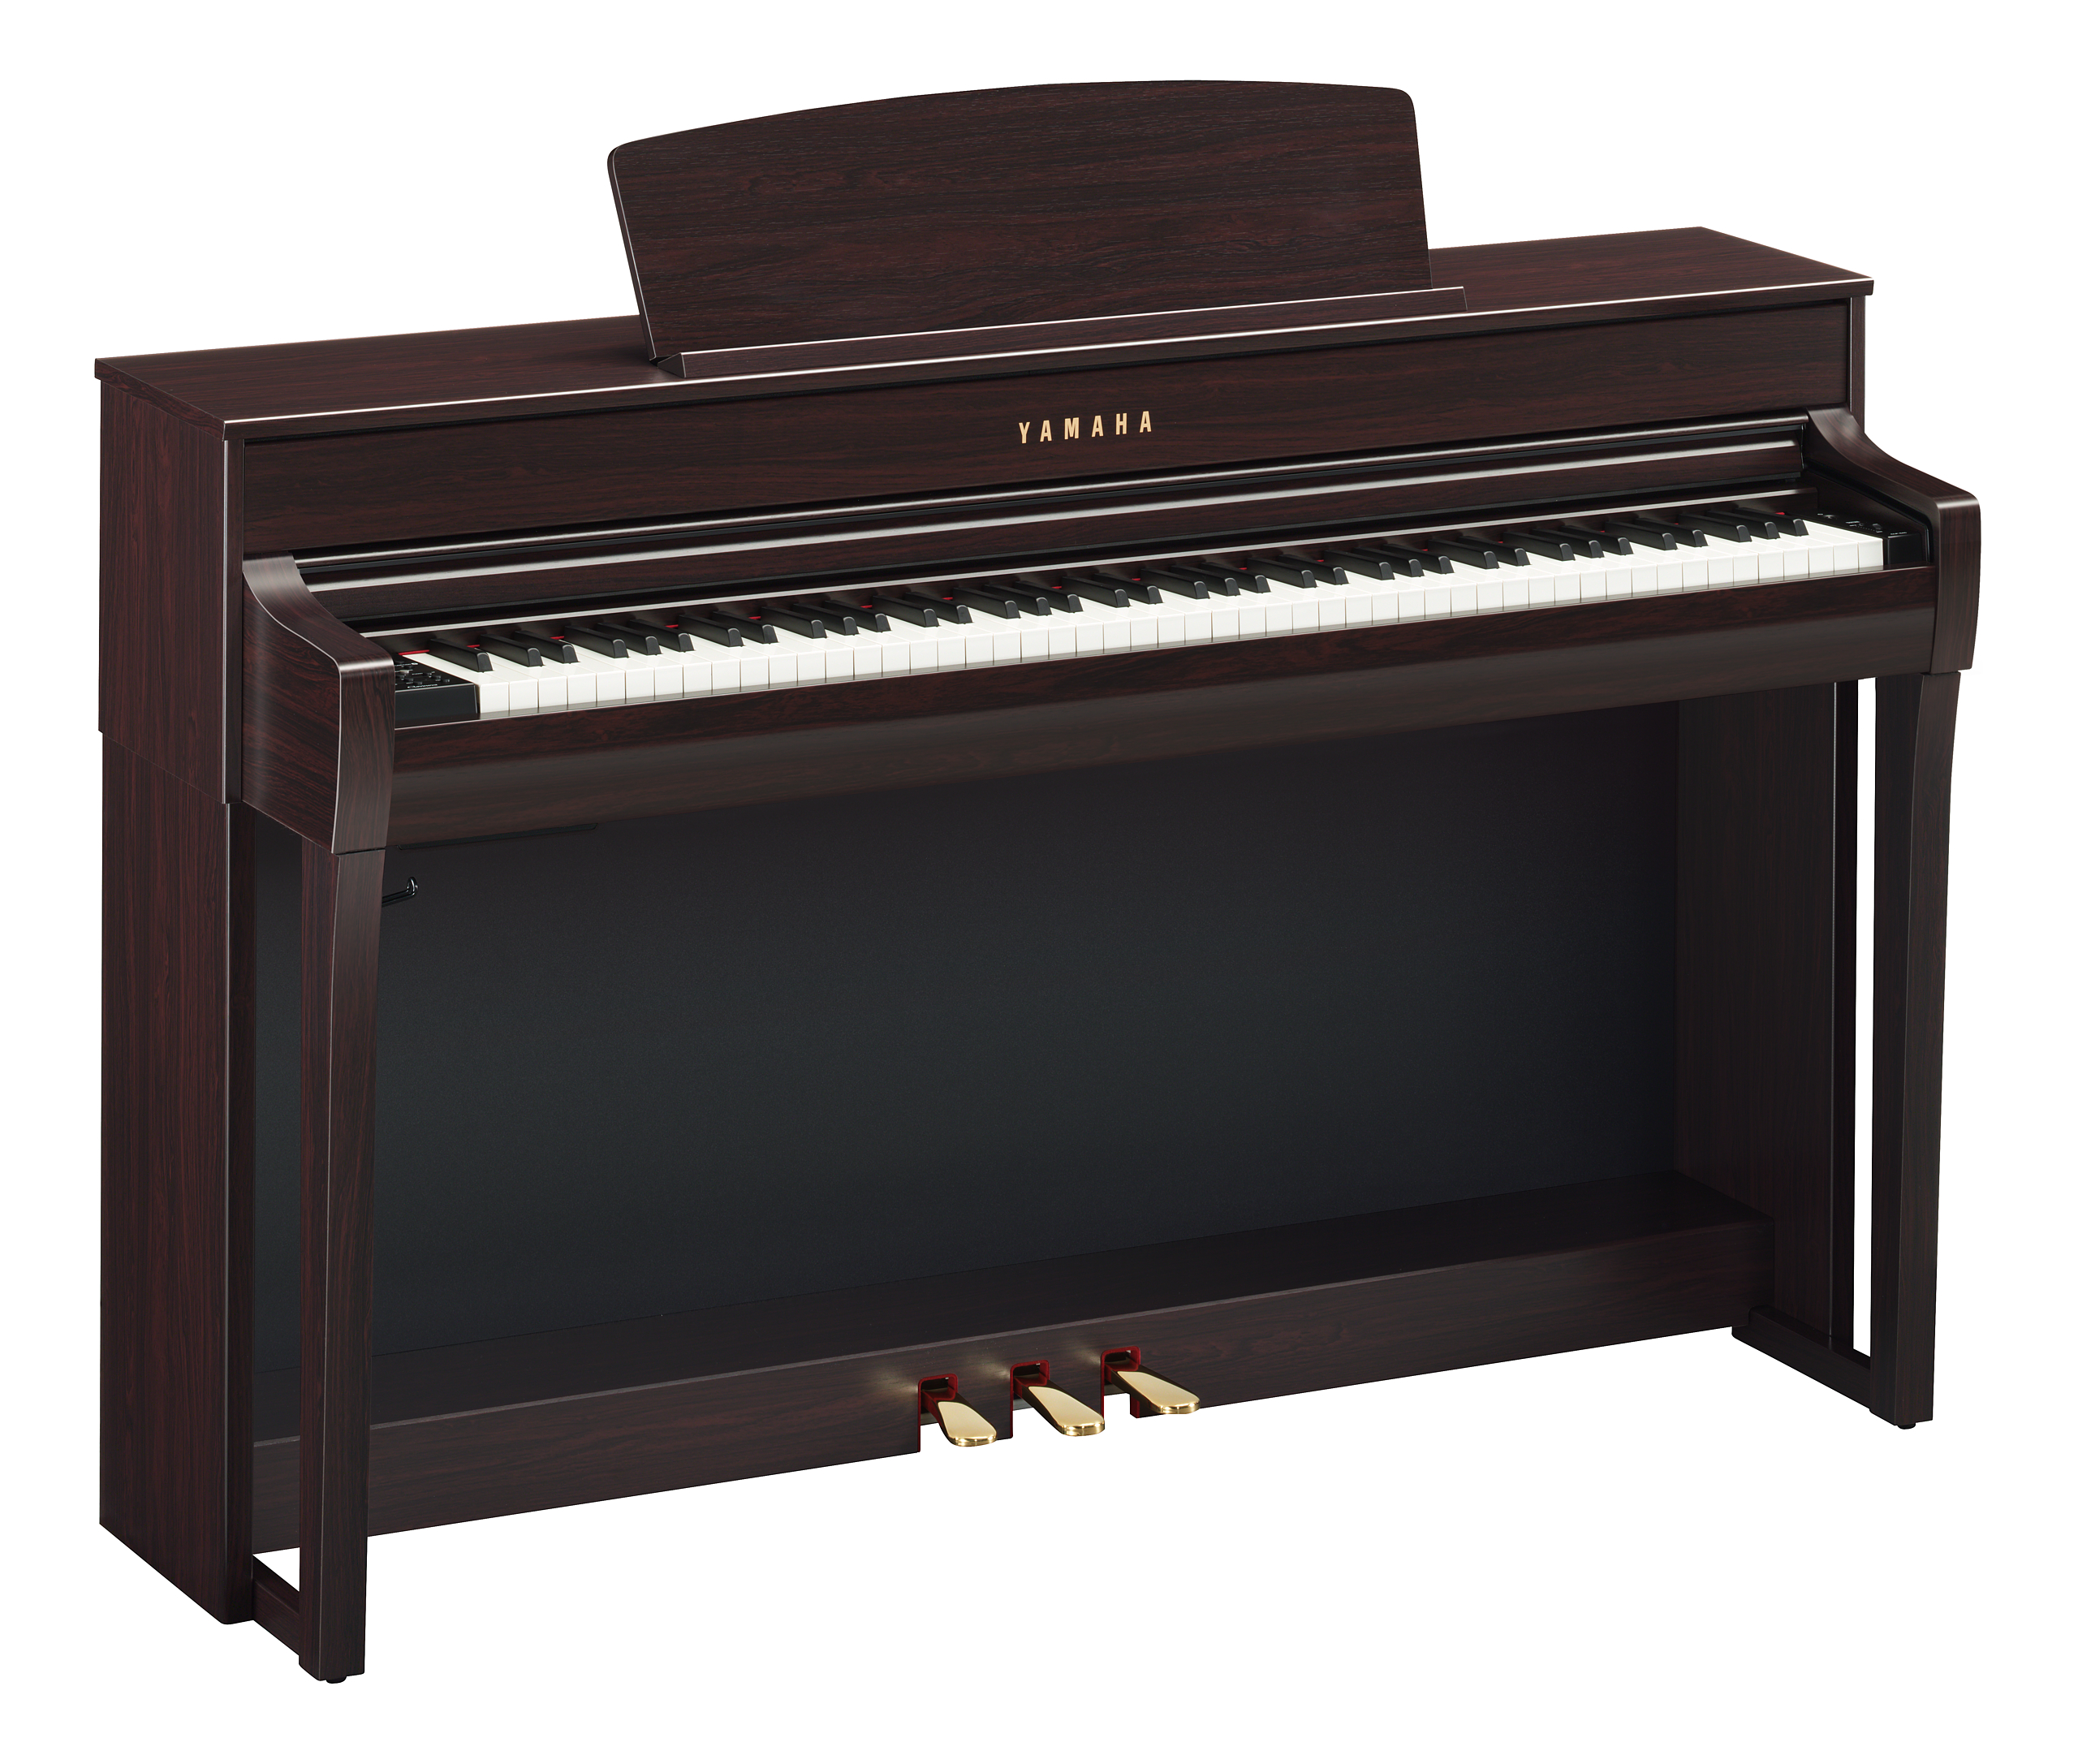 Yamaha Clp745r - Digital piano with stand - Variation 1